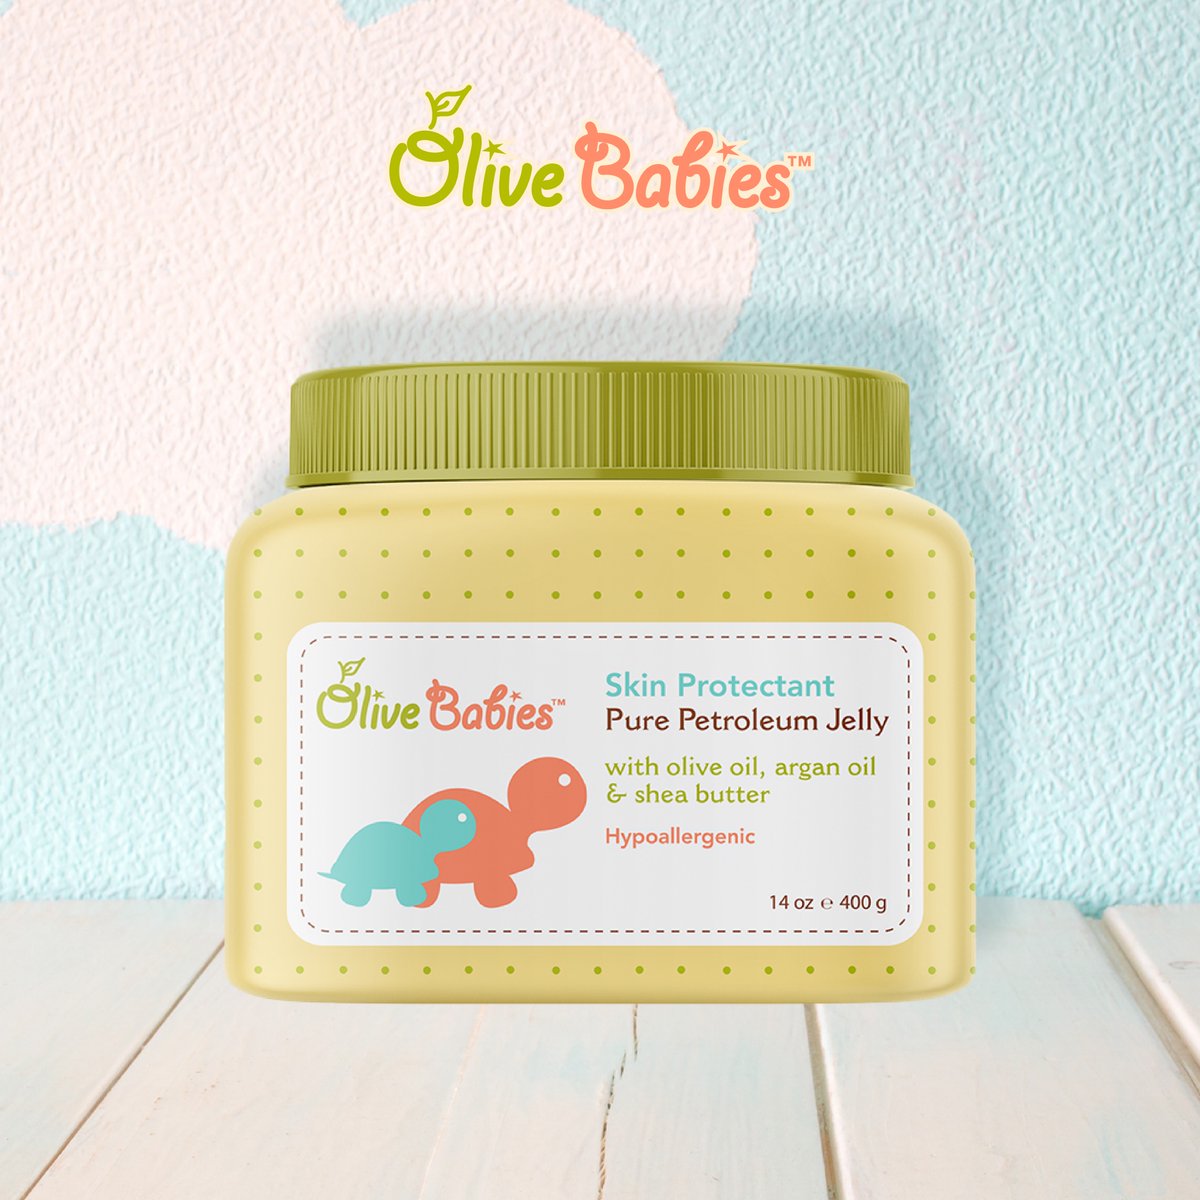 Nurturing nature's way! 🌿✨ Introducing Olive Babies Nursery Skin Protectant, crafted with care from the finest ingredients like olive oil, argan oil, and shea butter. 
#OliveBabies #KidsHair #KidsHairCare #KidsHairProducts #BabyOil #HairDetangler #DetanglerForKids #KidSkinCare